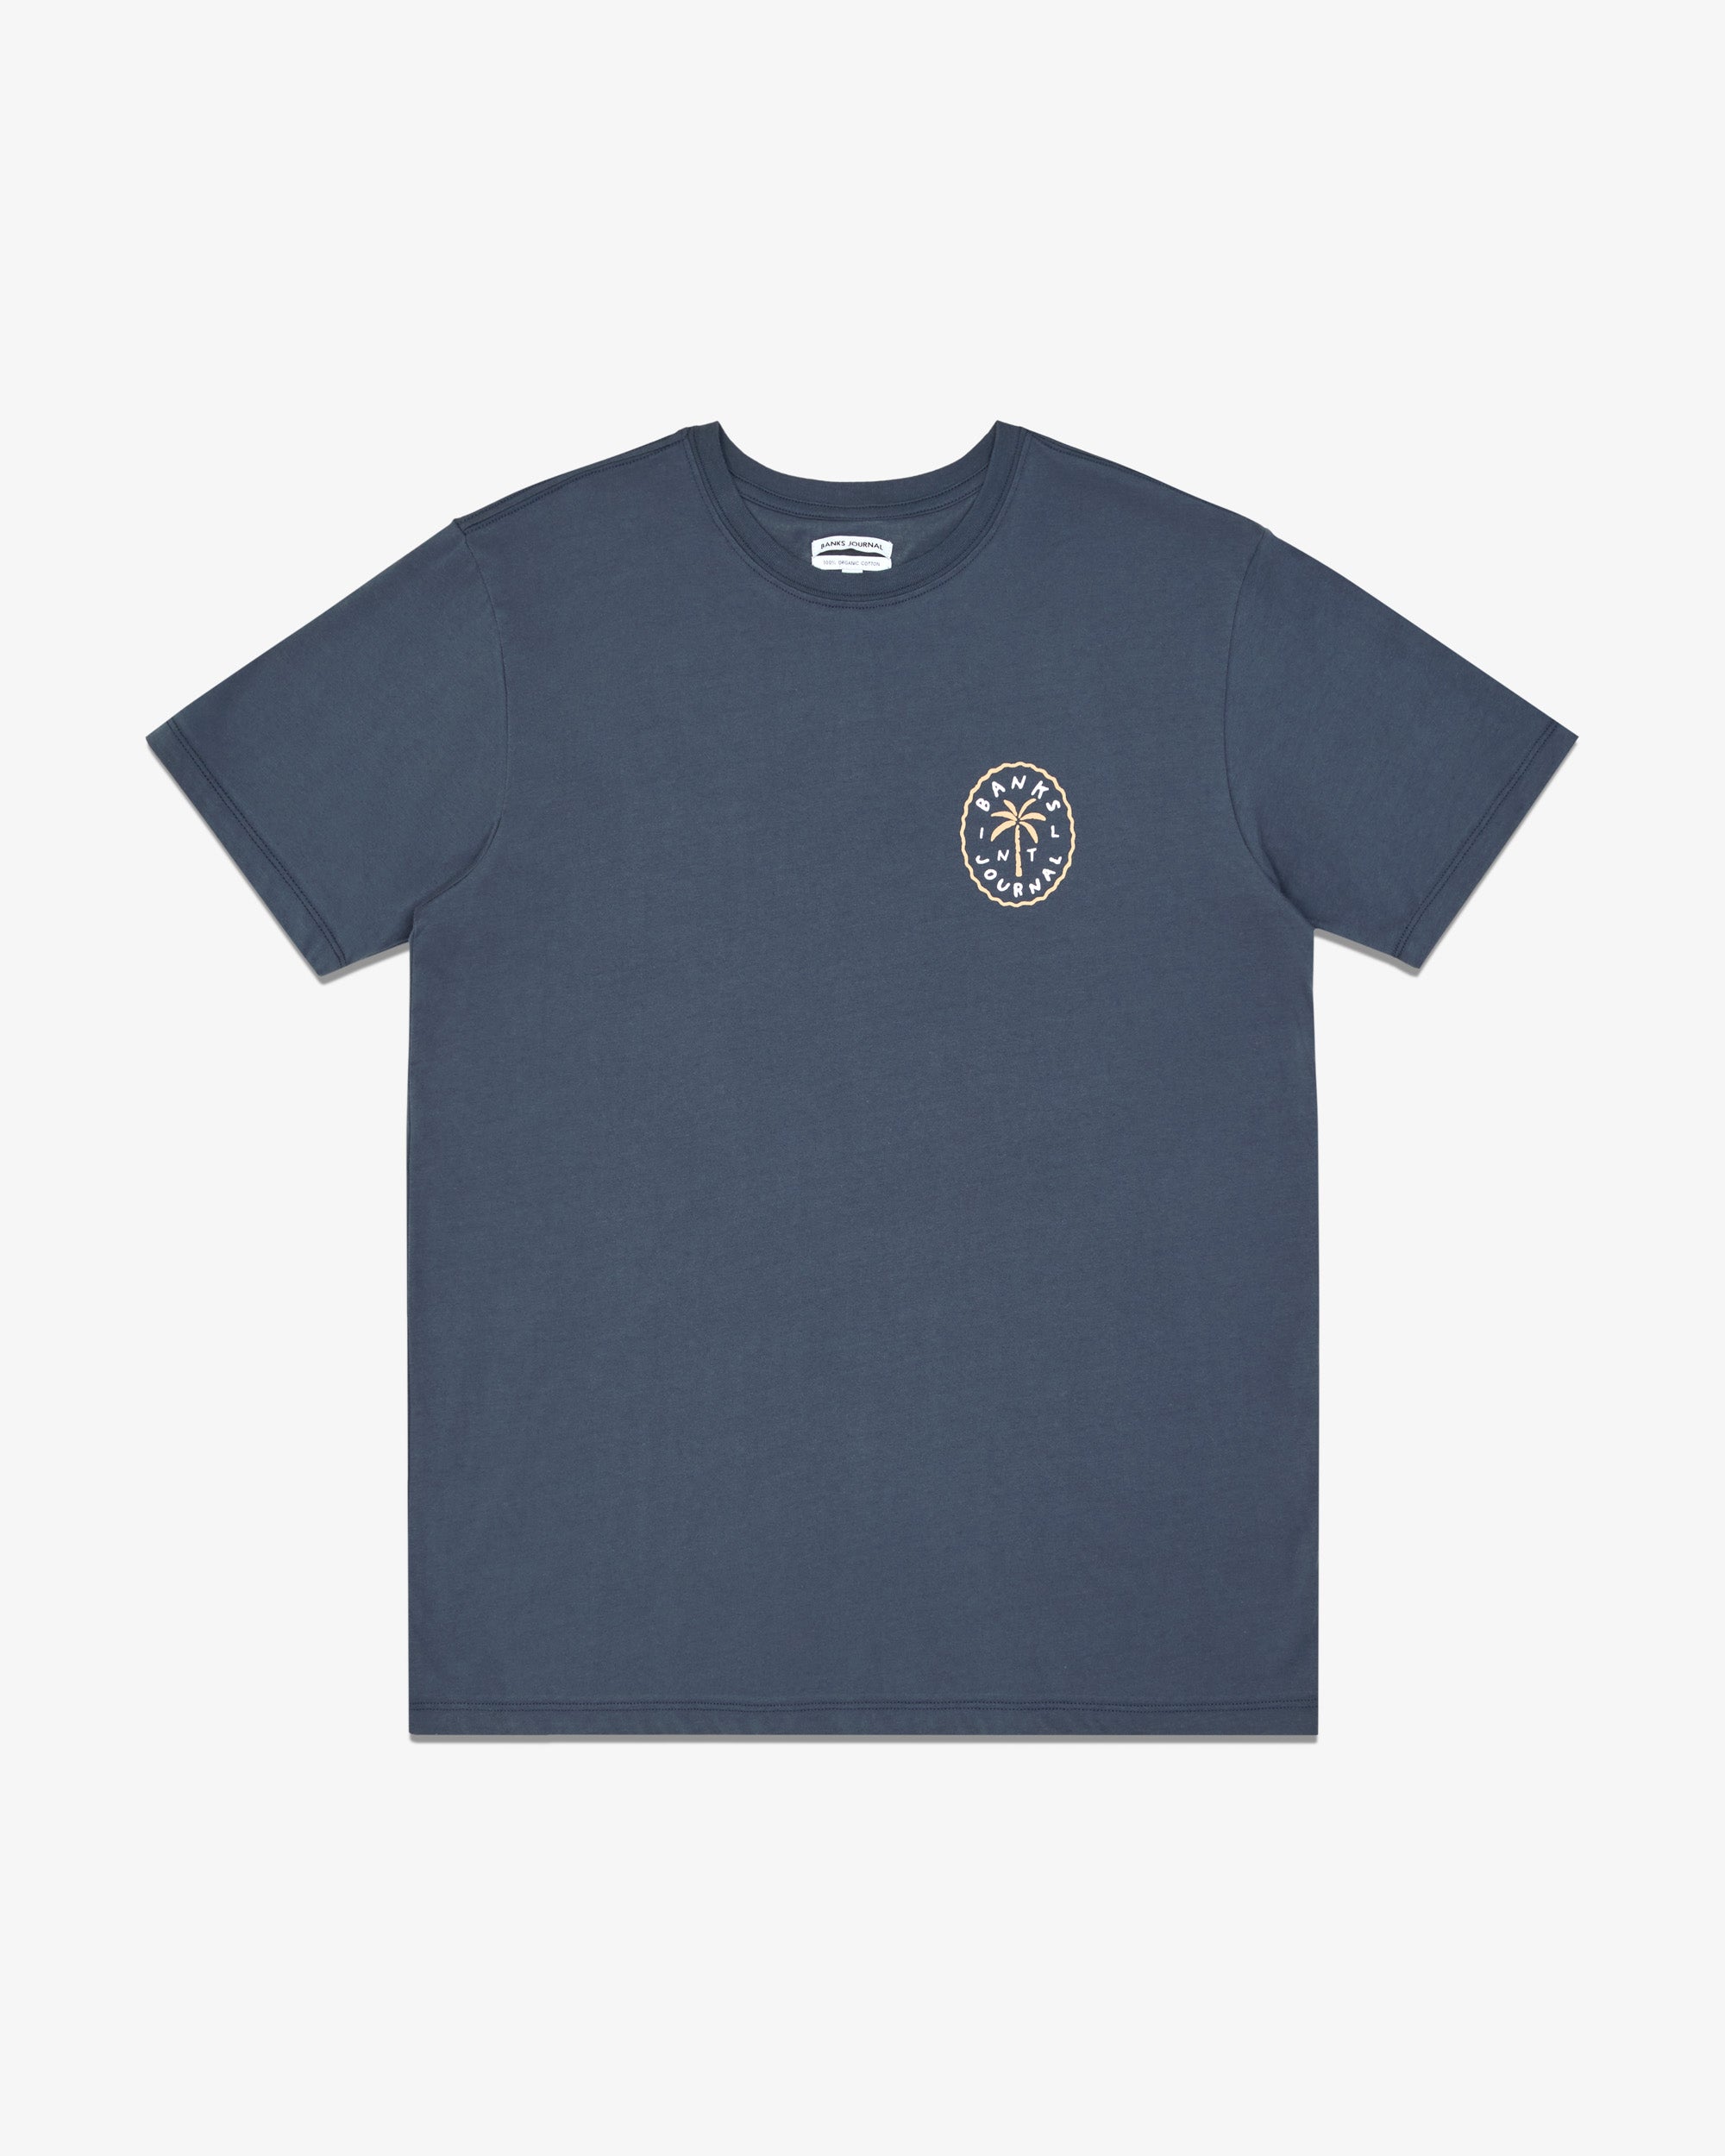 Four Elements Classic Tee